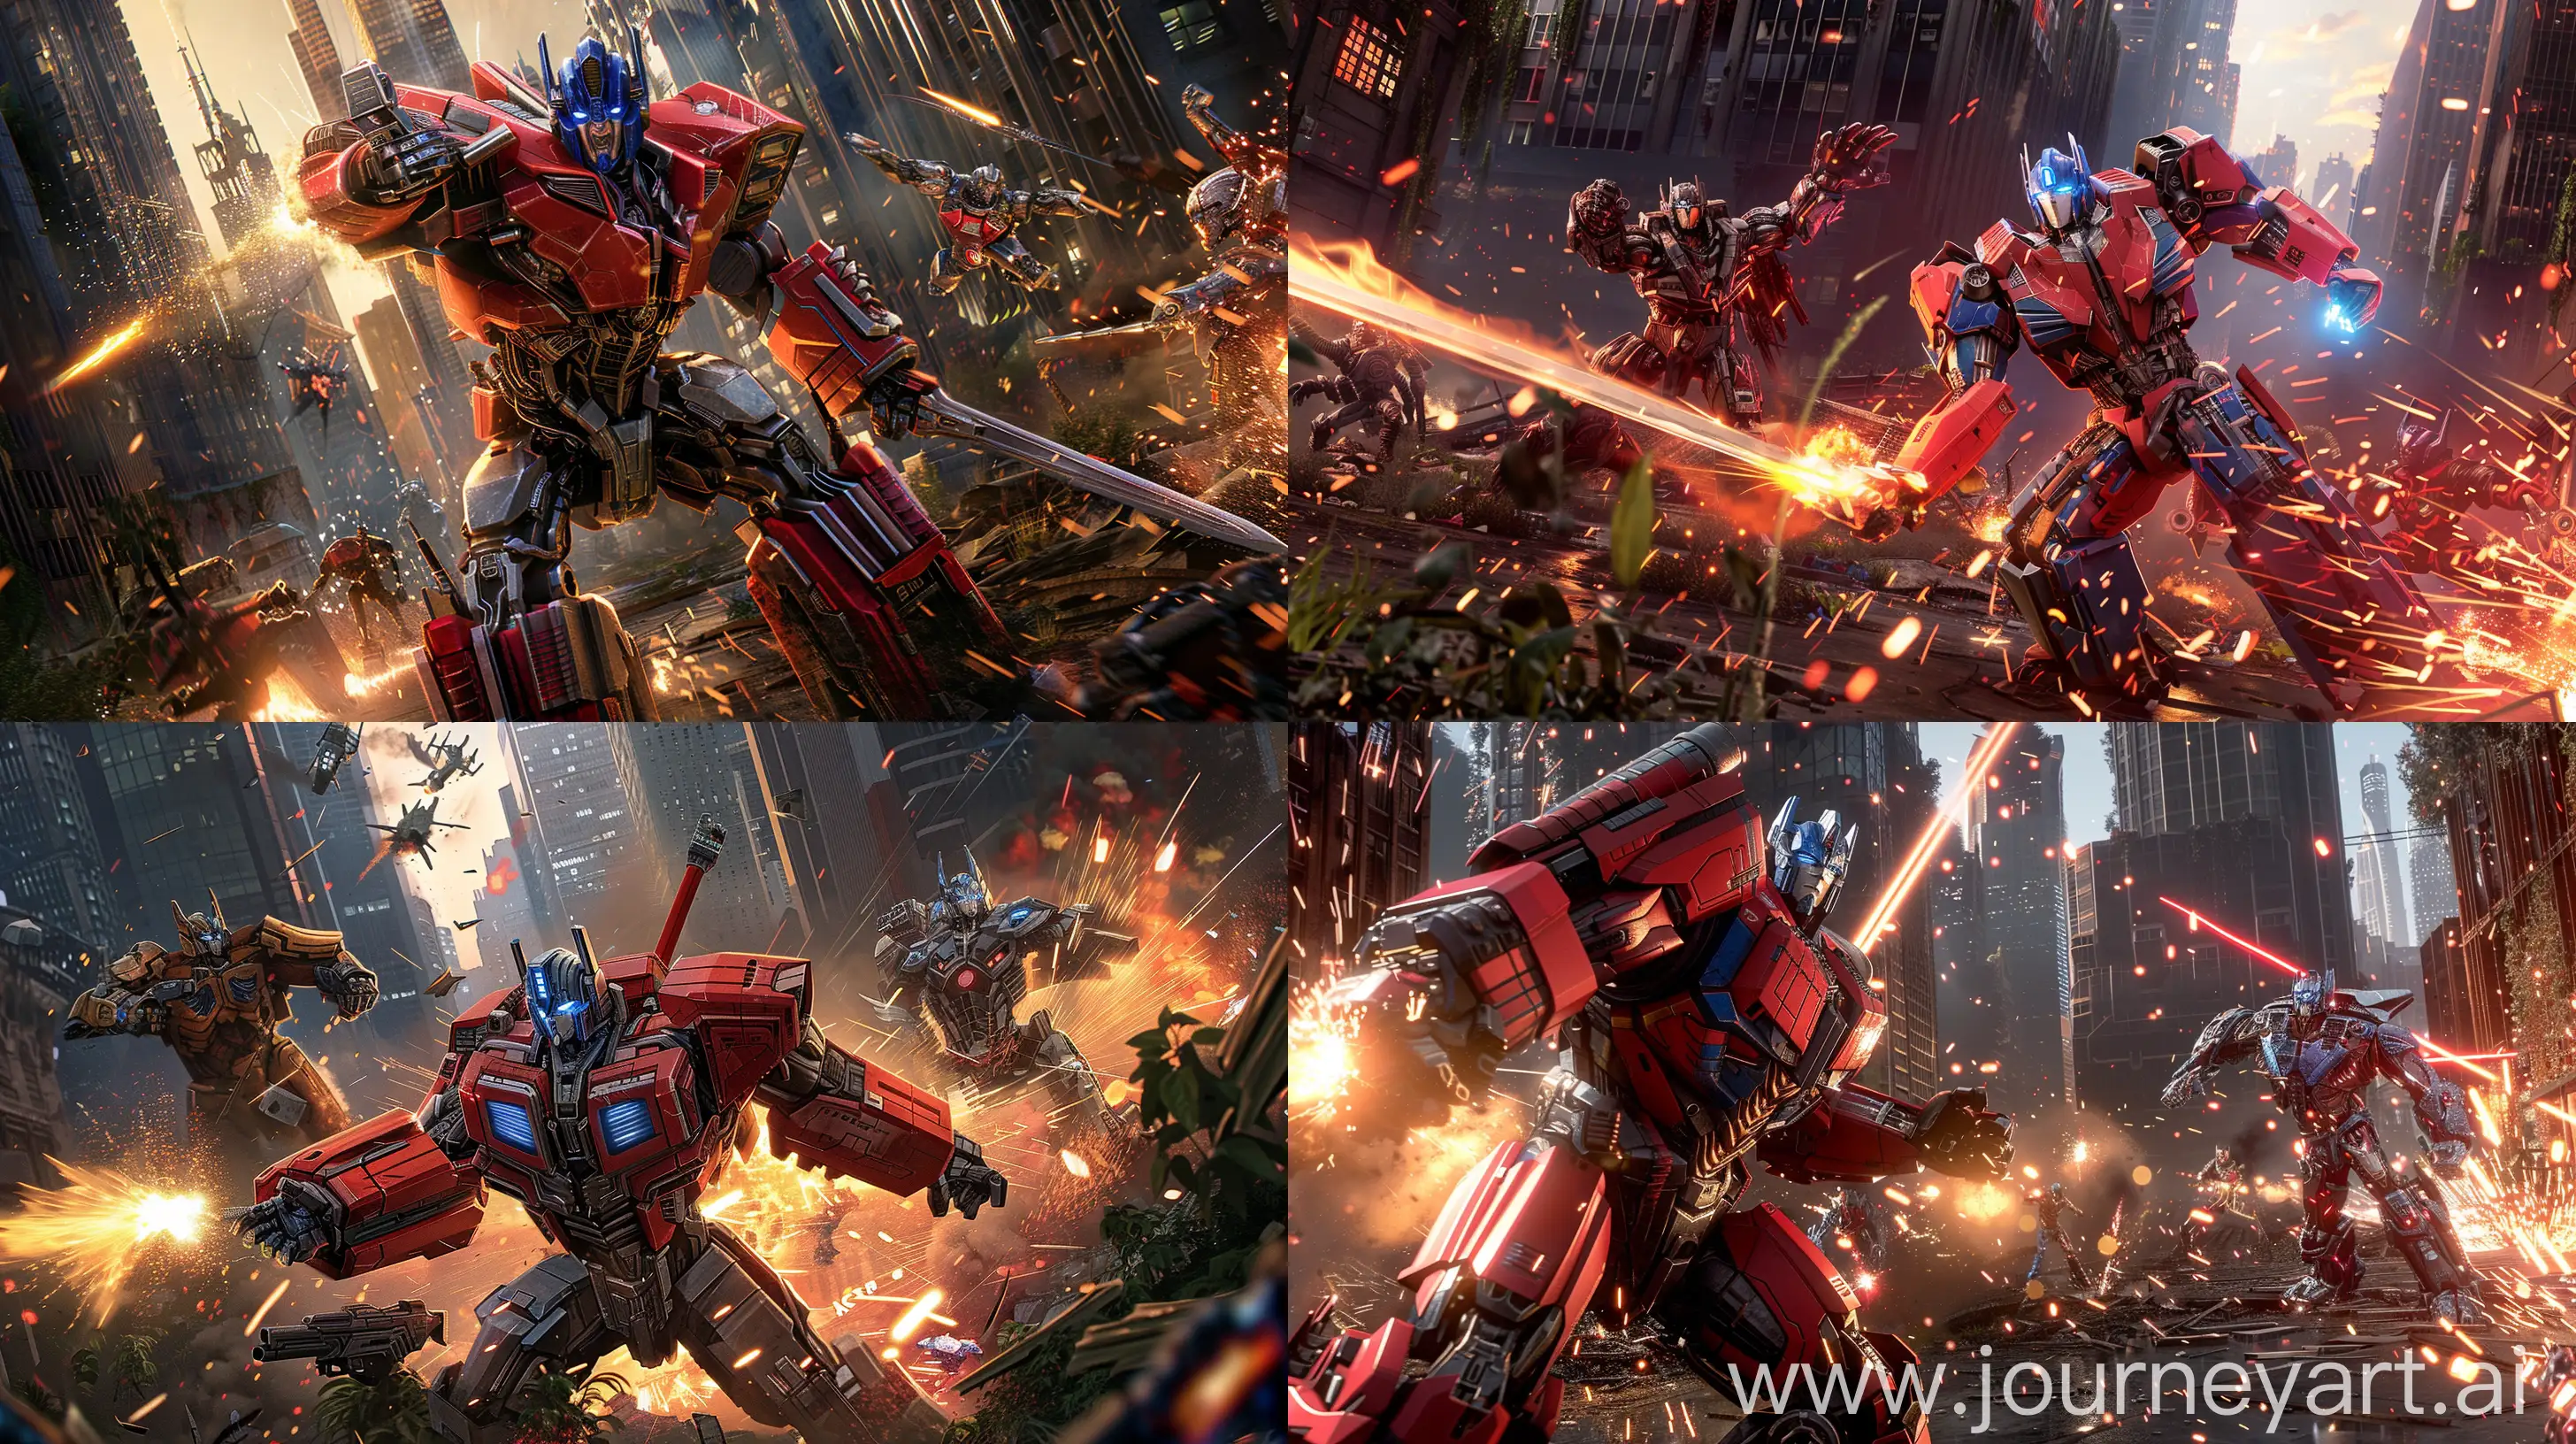 In the heart of an urban jungle, surrounded by ruined skyscrapers and streets overrun with vegetation, Autobots and Decepticons fiercely battle it out. In the background, Maximals are seen collaborating with Autobots, utilizing their unique abilities to fight against the incoming Predacons and Terrorcons. In the foreground, illuminated by sparks and explosions, Optimus Prime delivers a blow to Megatron with his iconic sword, while shots and explosions fly through the air. The scene is imbued with drama and action tension, dominated by shades of red and orange, lighting accentuating the metallic strength and prowess of the characters. --ar 16:9 --style raw --v 6.0